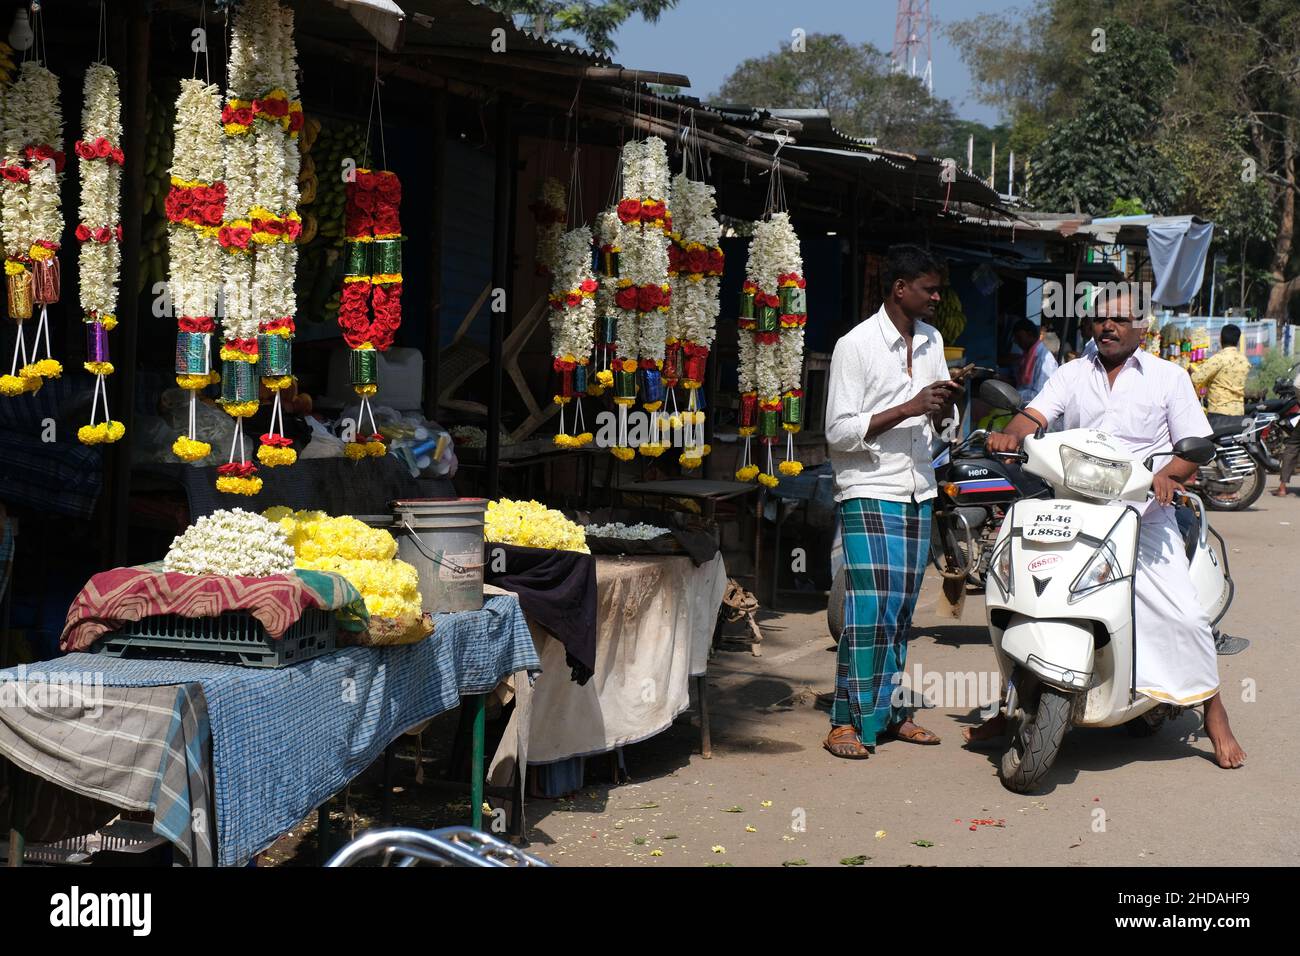 December 20, 2021, Colorful garlands flower selling in the market stalls in Karnataka, India, These flowers are used for wedding decorations, temple c Stock Photo